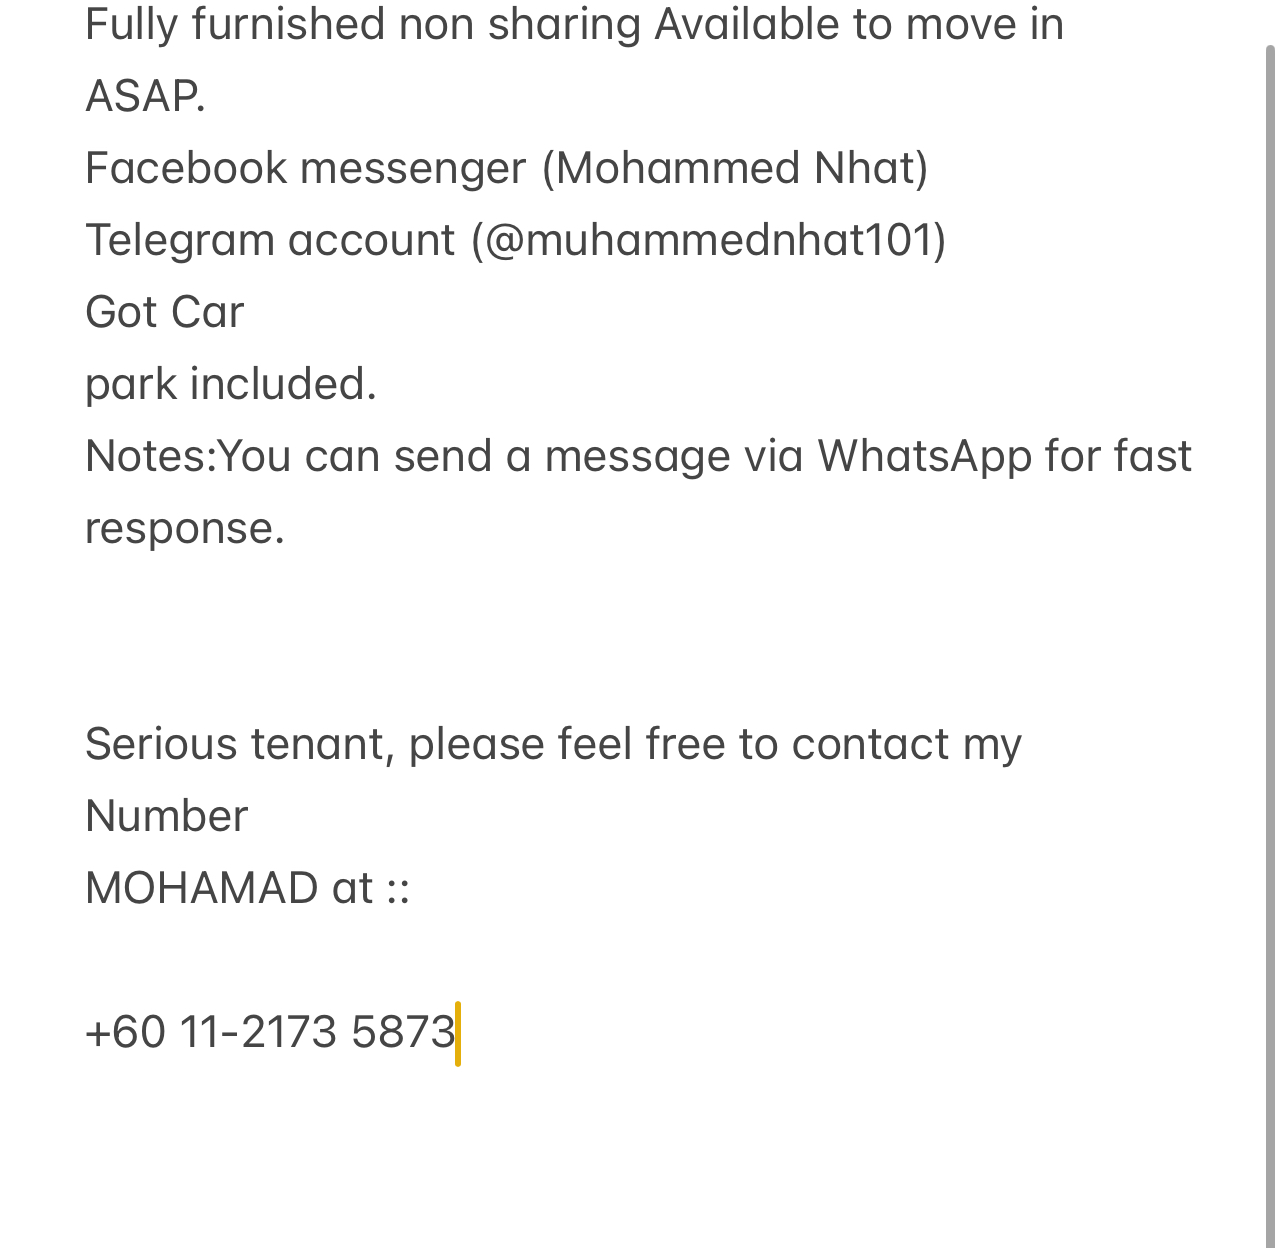 room for rent, single room, india street, Send the owner a message on WhatsApp/facebook if you want to RENT the unit facebook (Mohammed Nhat)&Telegram(@muhammednhat101) Fully furnished non sharing :(comfortable)